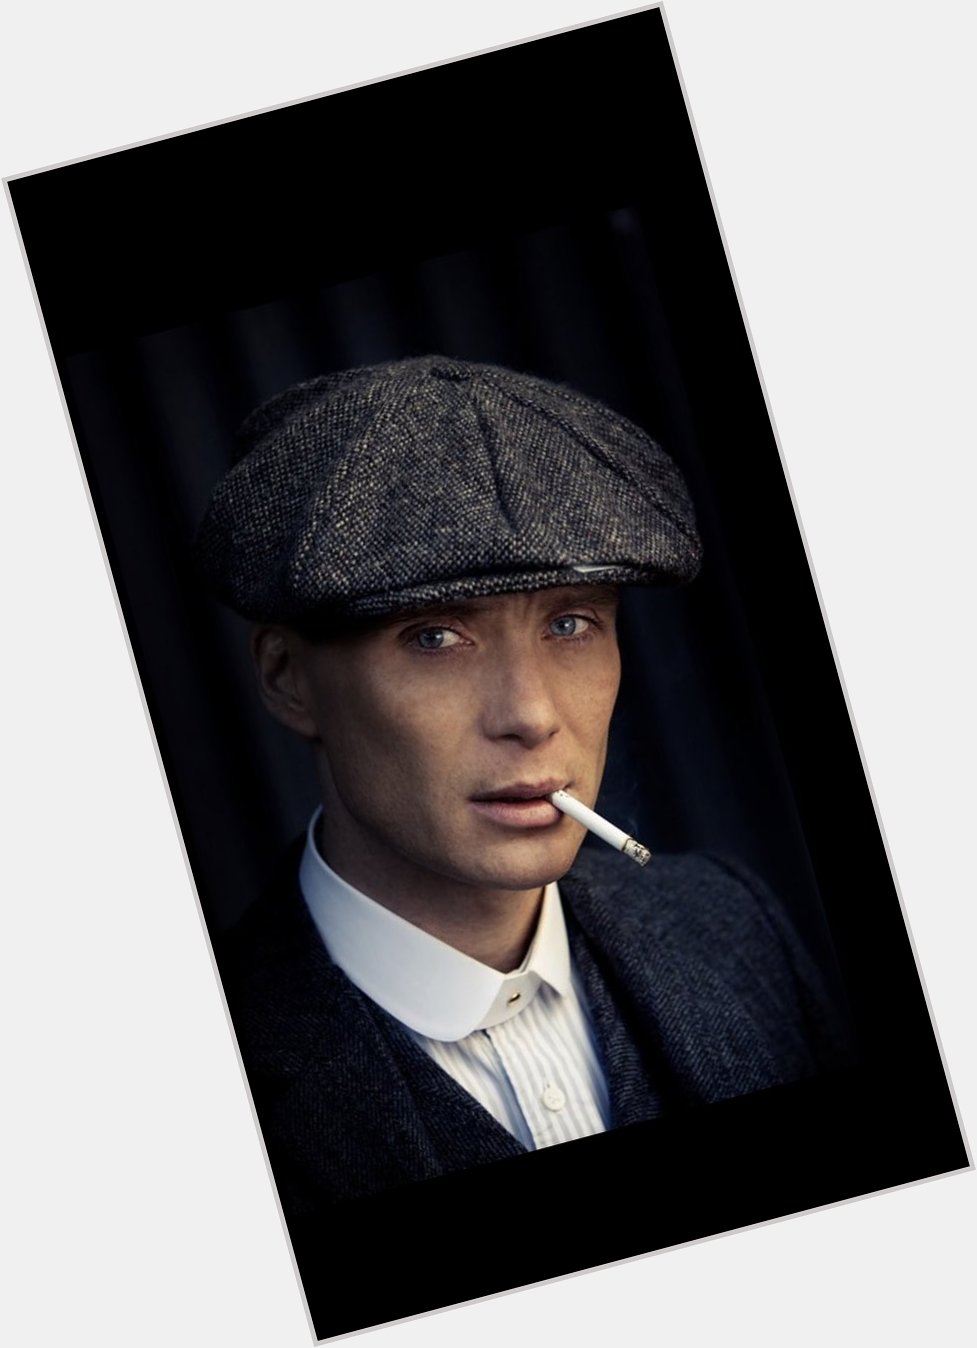 Happy Bday to Cillian Murphy. Idk why more People don t watch Peaky Blinders. 